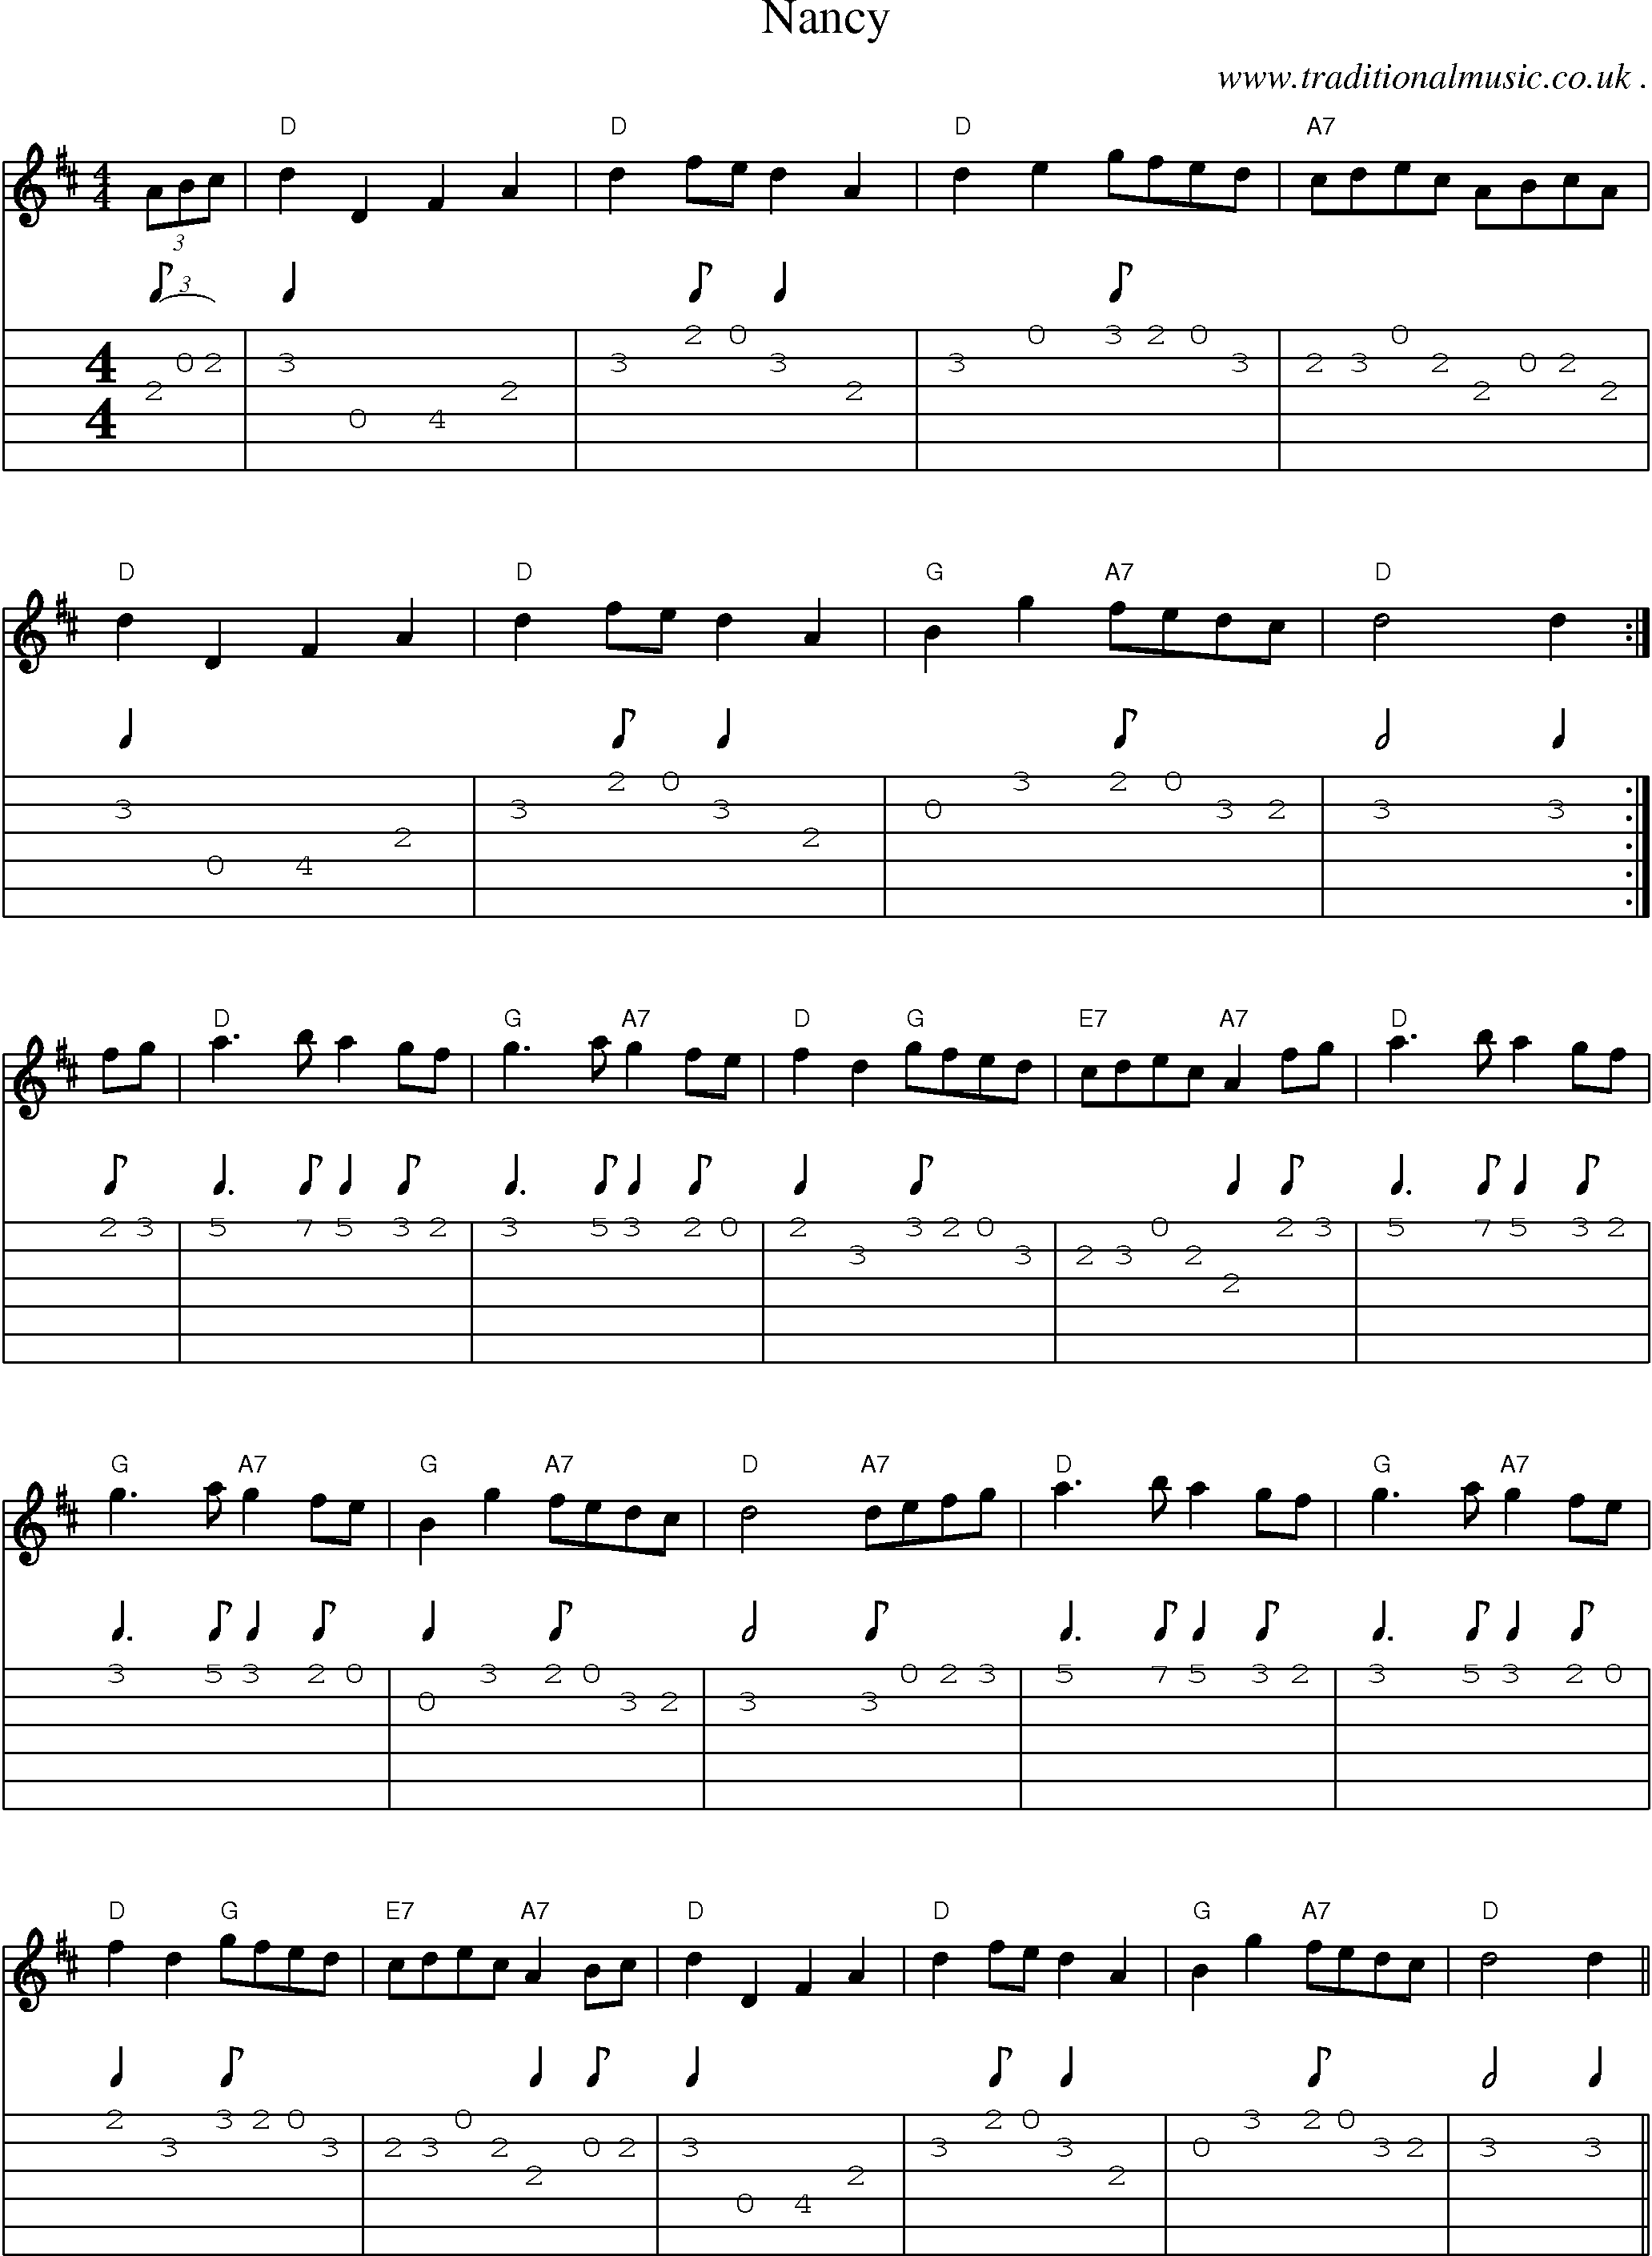 Sheet-Music and Guitar Tabs for Nancy